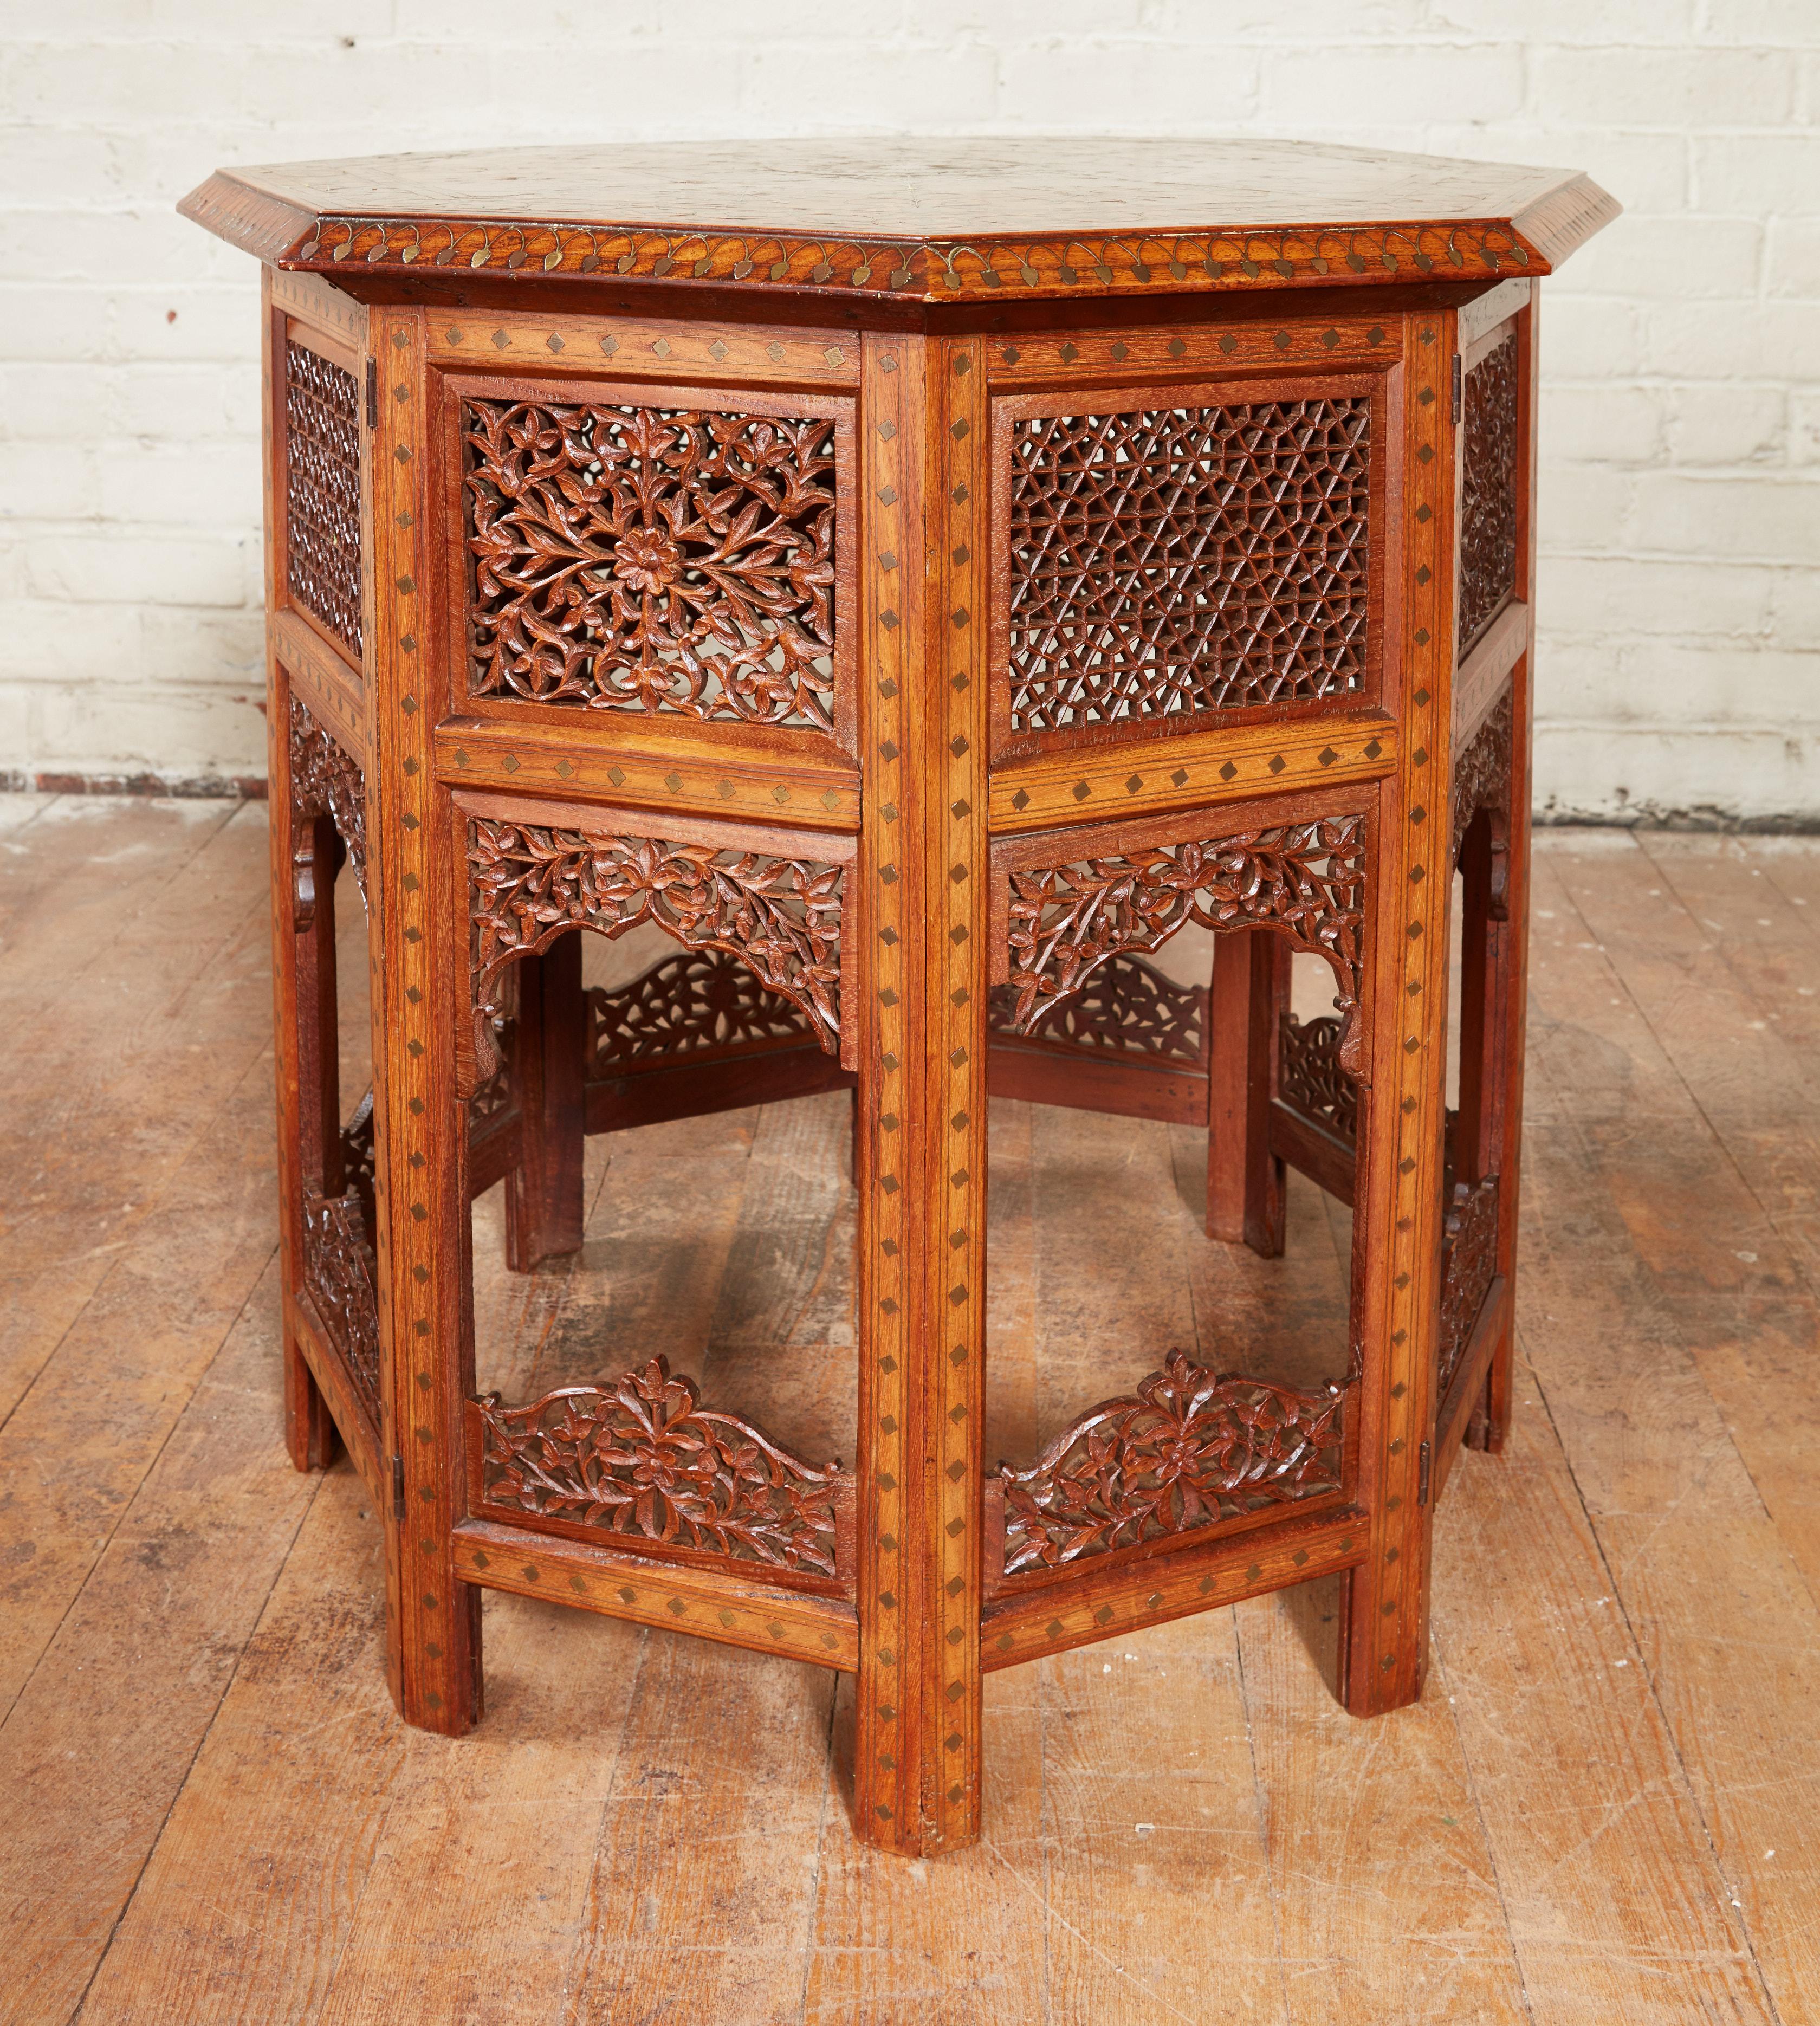 Fine late 19th Century Indian taboret table having mixed brass and copper and ebony inlay, the octagonal top with dazzling mixed metal details, the accordion action base similarly decorated and also with pierced carved panels and brackets, the whole